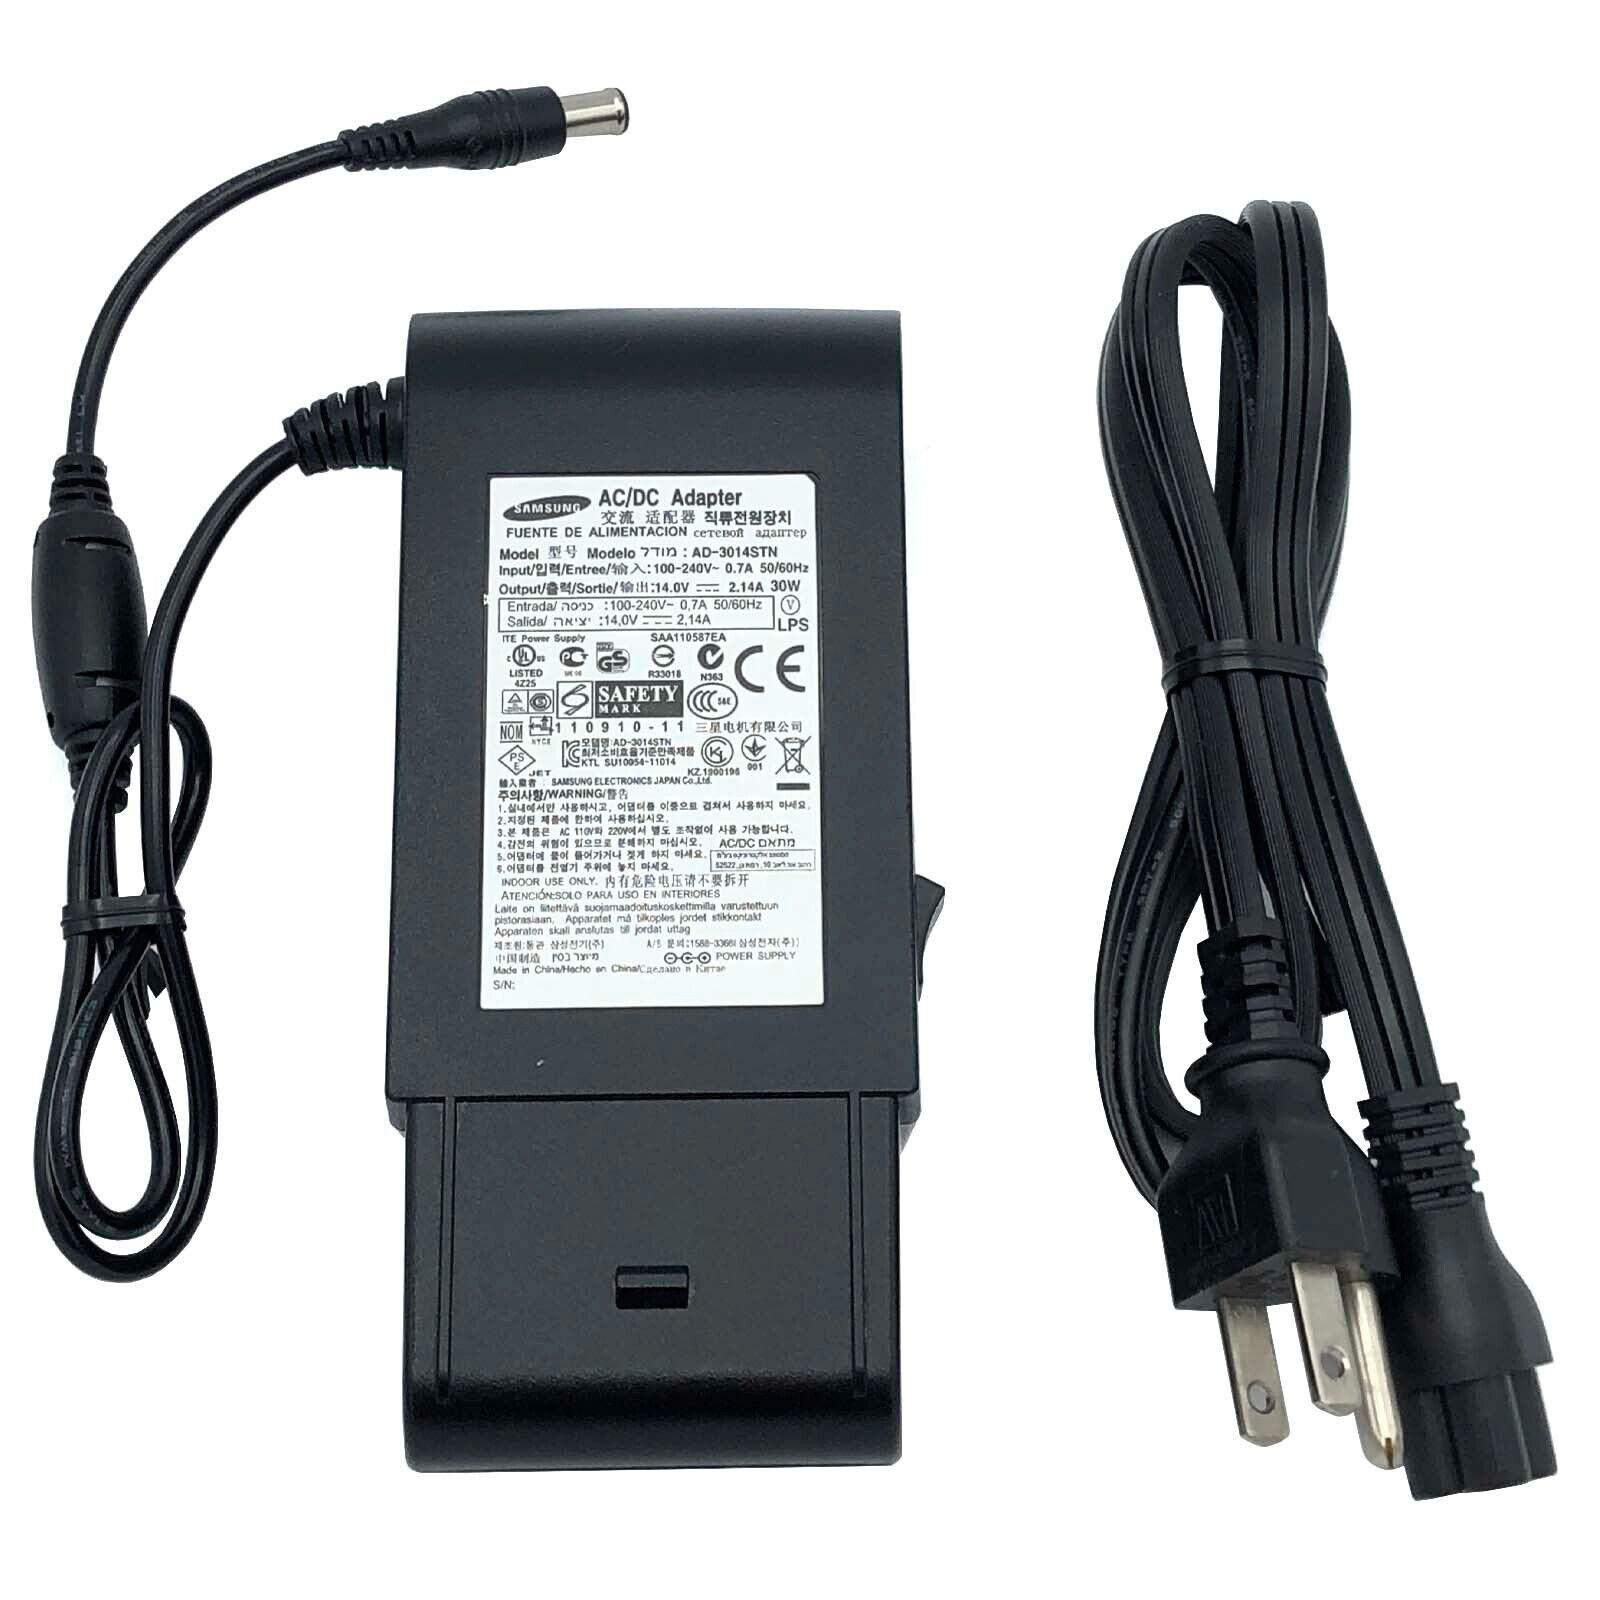 NEW OEM Samsung SyncMaster S22A460 LED Monitor Power Adapter 14V 2.14A 30W w/PC